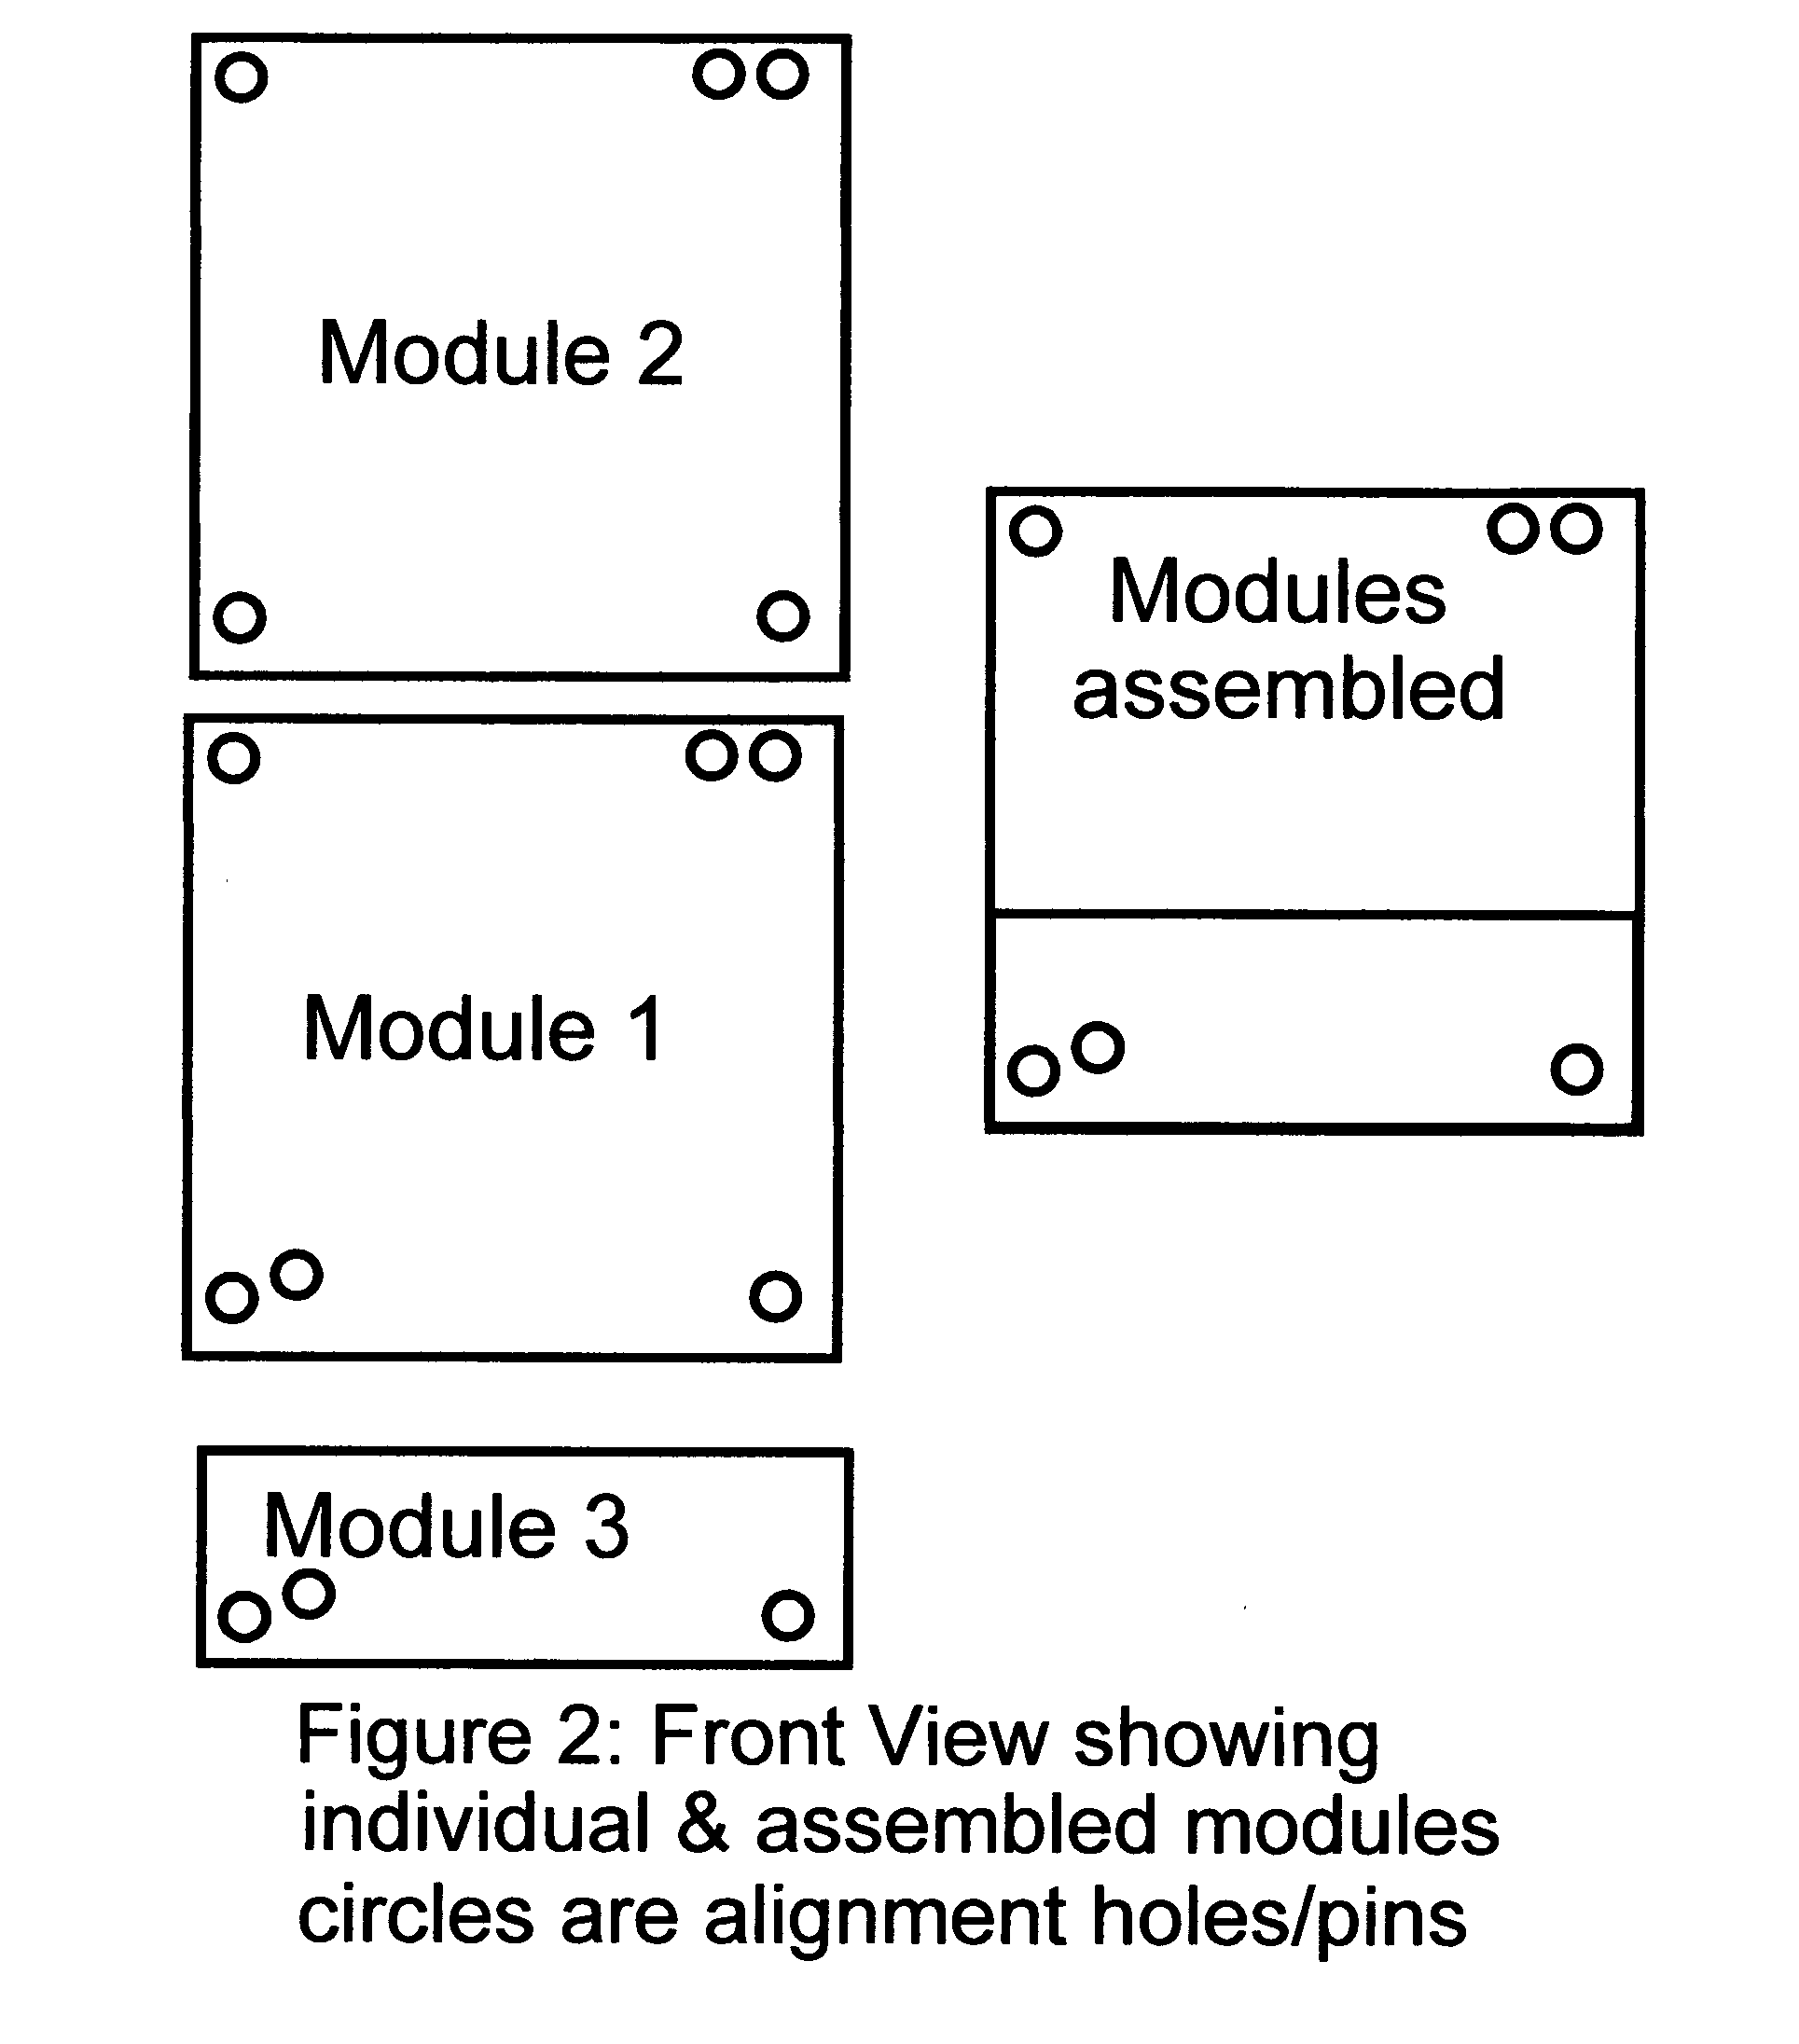 Robust modular electronic device without direct electrical connections for inter-module communication or control